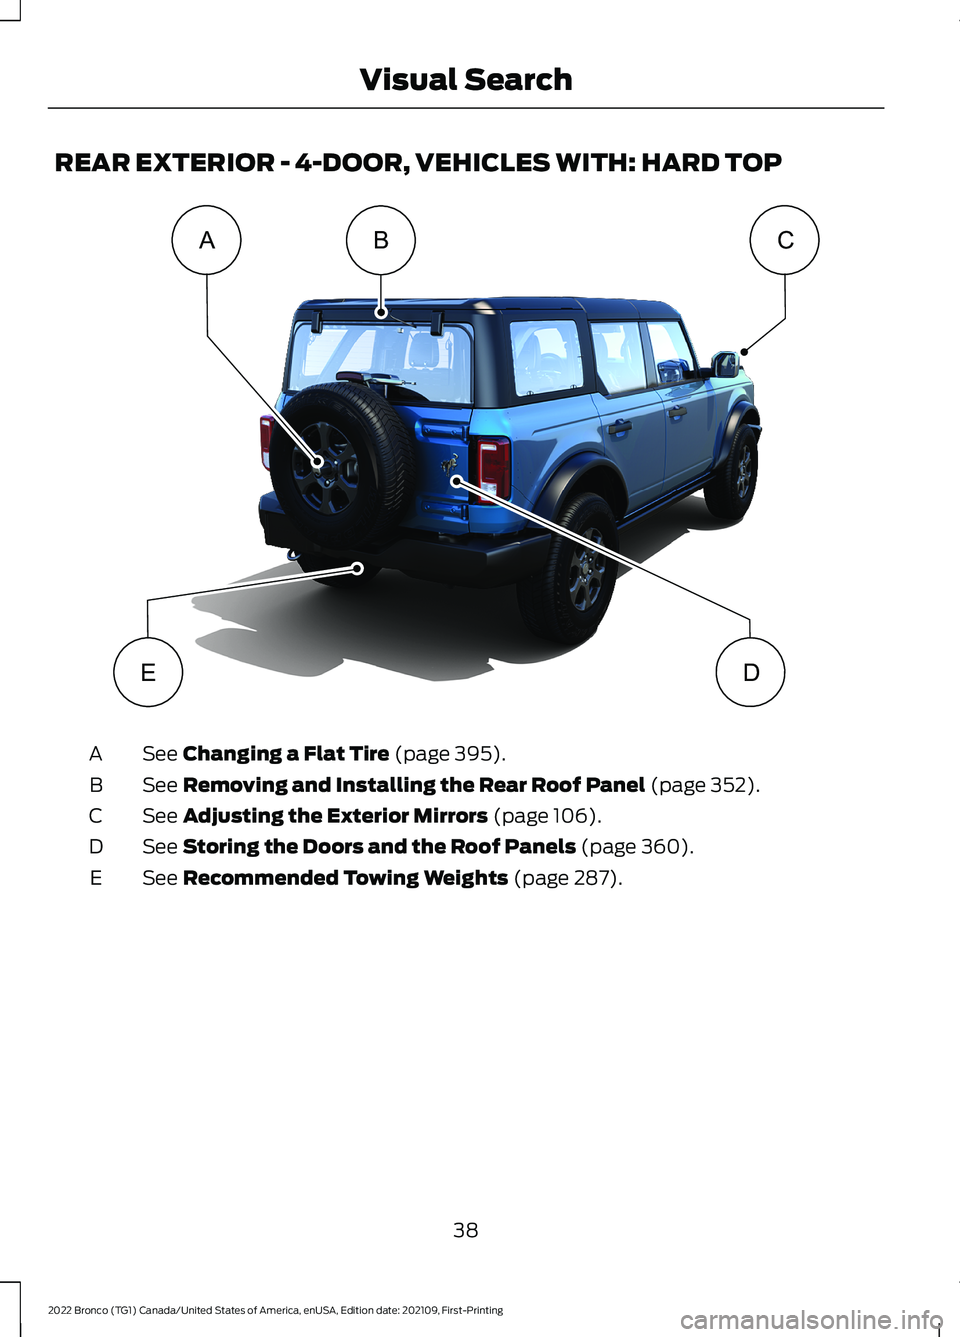 FORD BRONCO 2022  Owners Manual REAR EXTERIOR - 4-DOOR, VEHICLES WITH: HARD TOP
See Changing a Flat Tire (page 395).A
See Removing and Installing the Rear Roof Panel (page 352).B
See Adjusting the Exterior Mirrors (page 106).C
See S